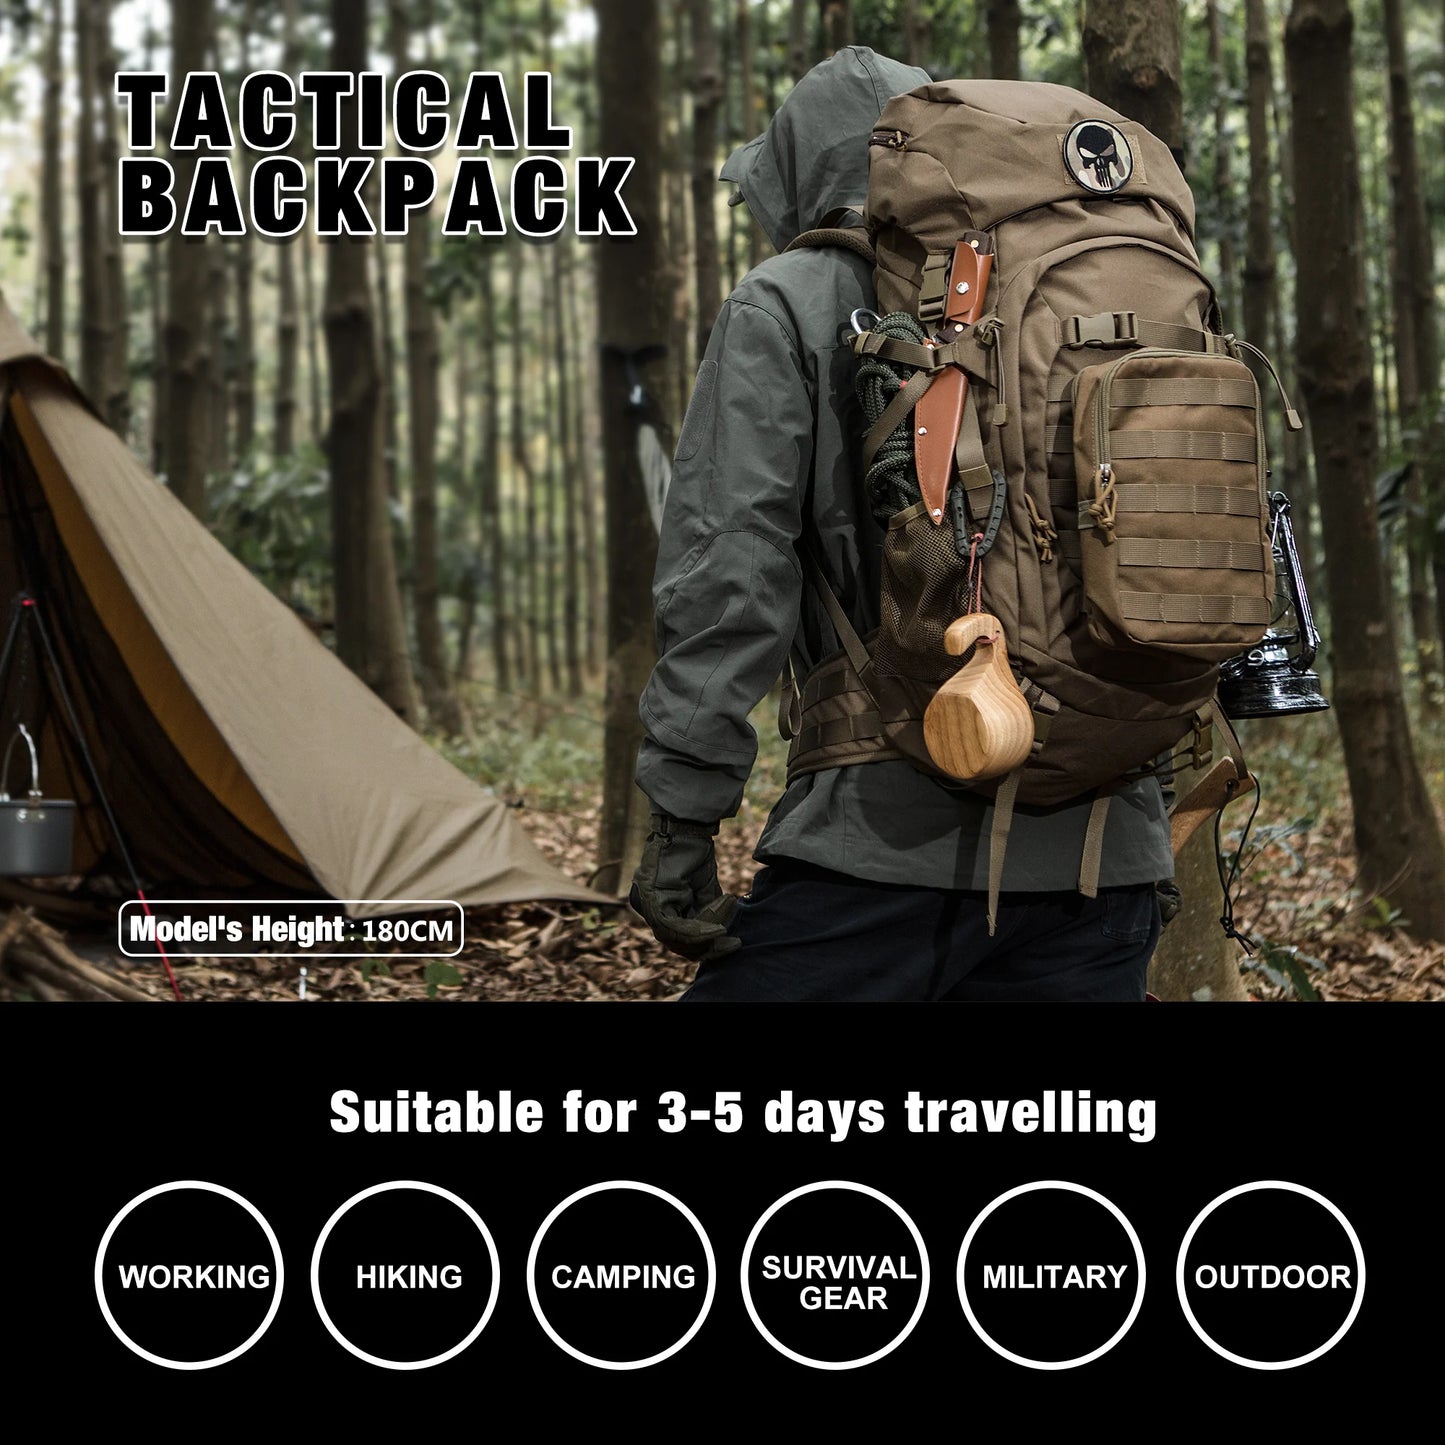 Mardingtop 50L Molle Hiking Internal Frame Backpacks with Rain Cover